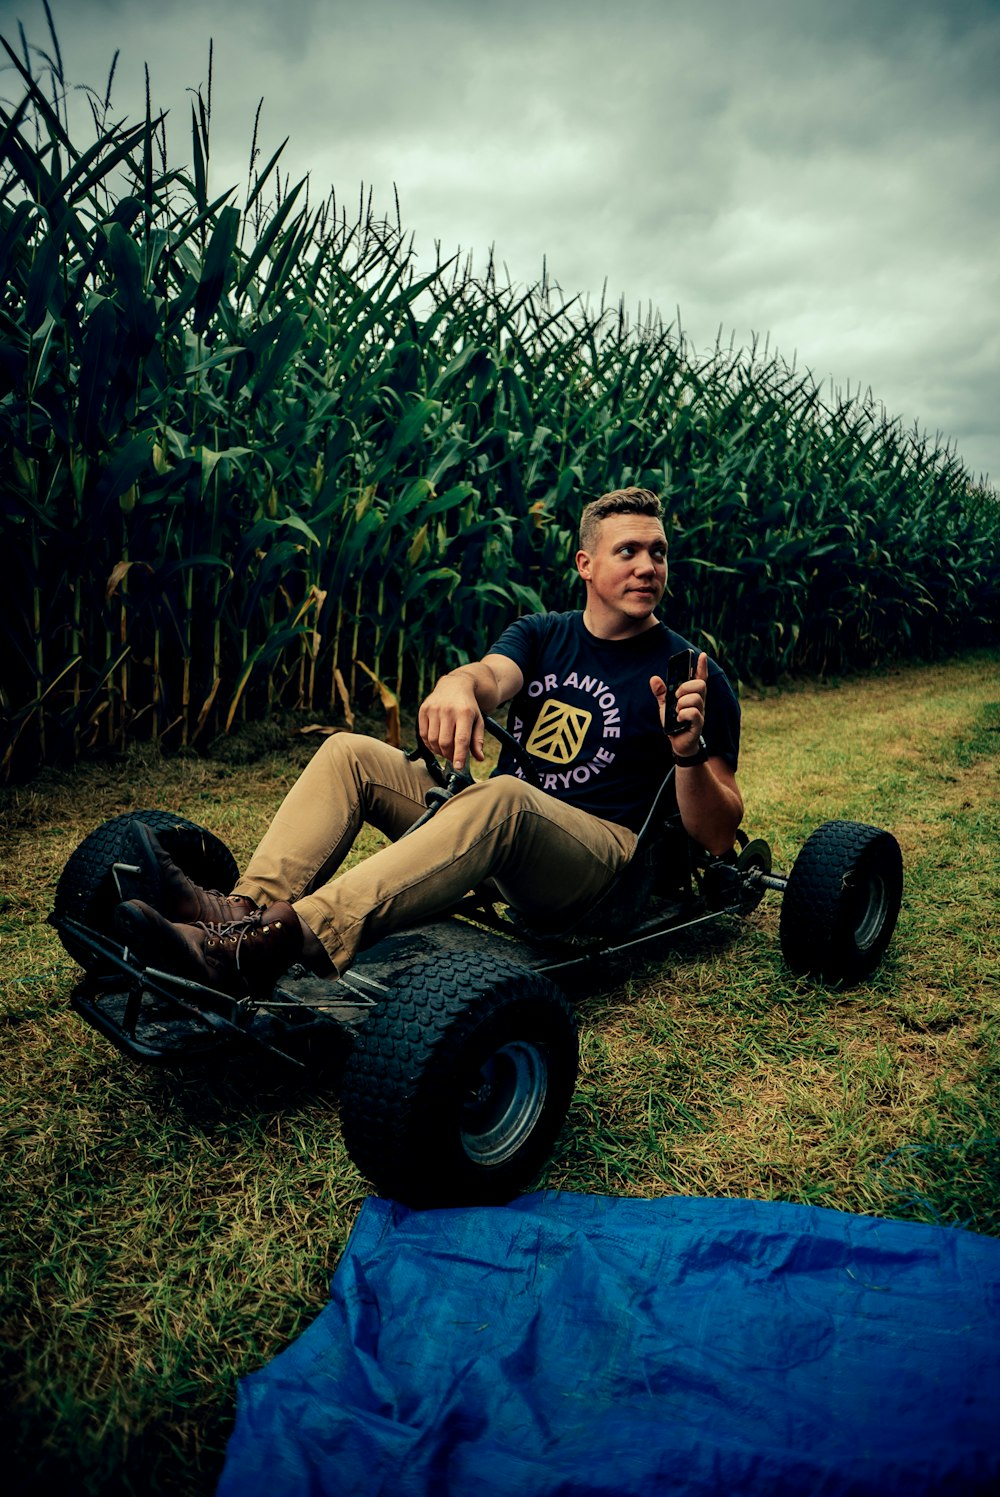 a person sitting on a lawnmower in a grassy area